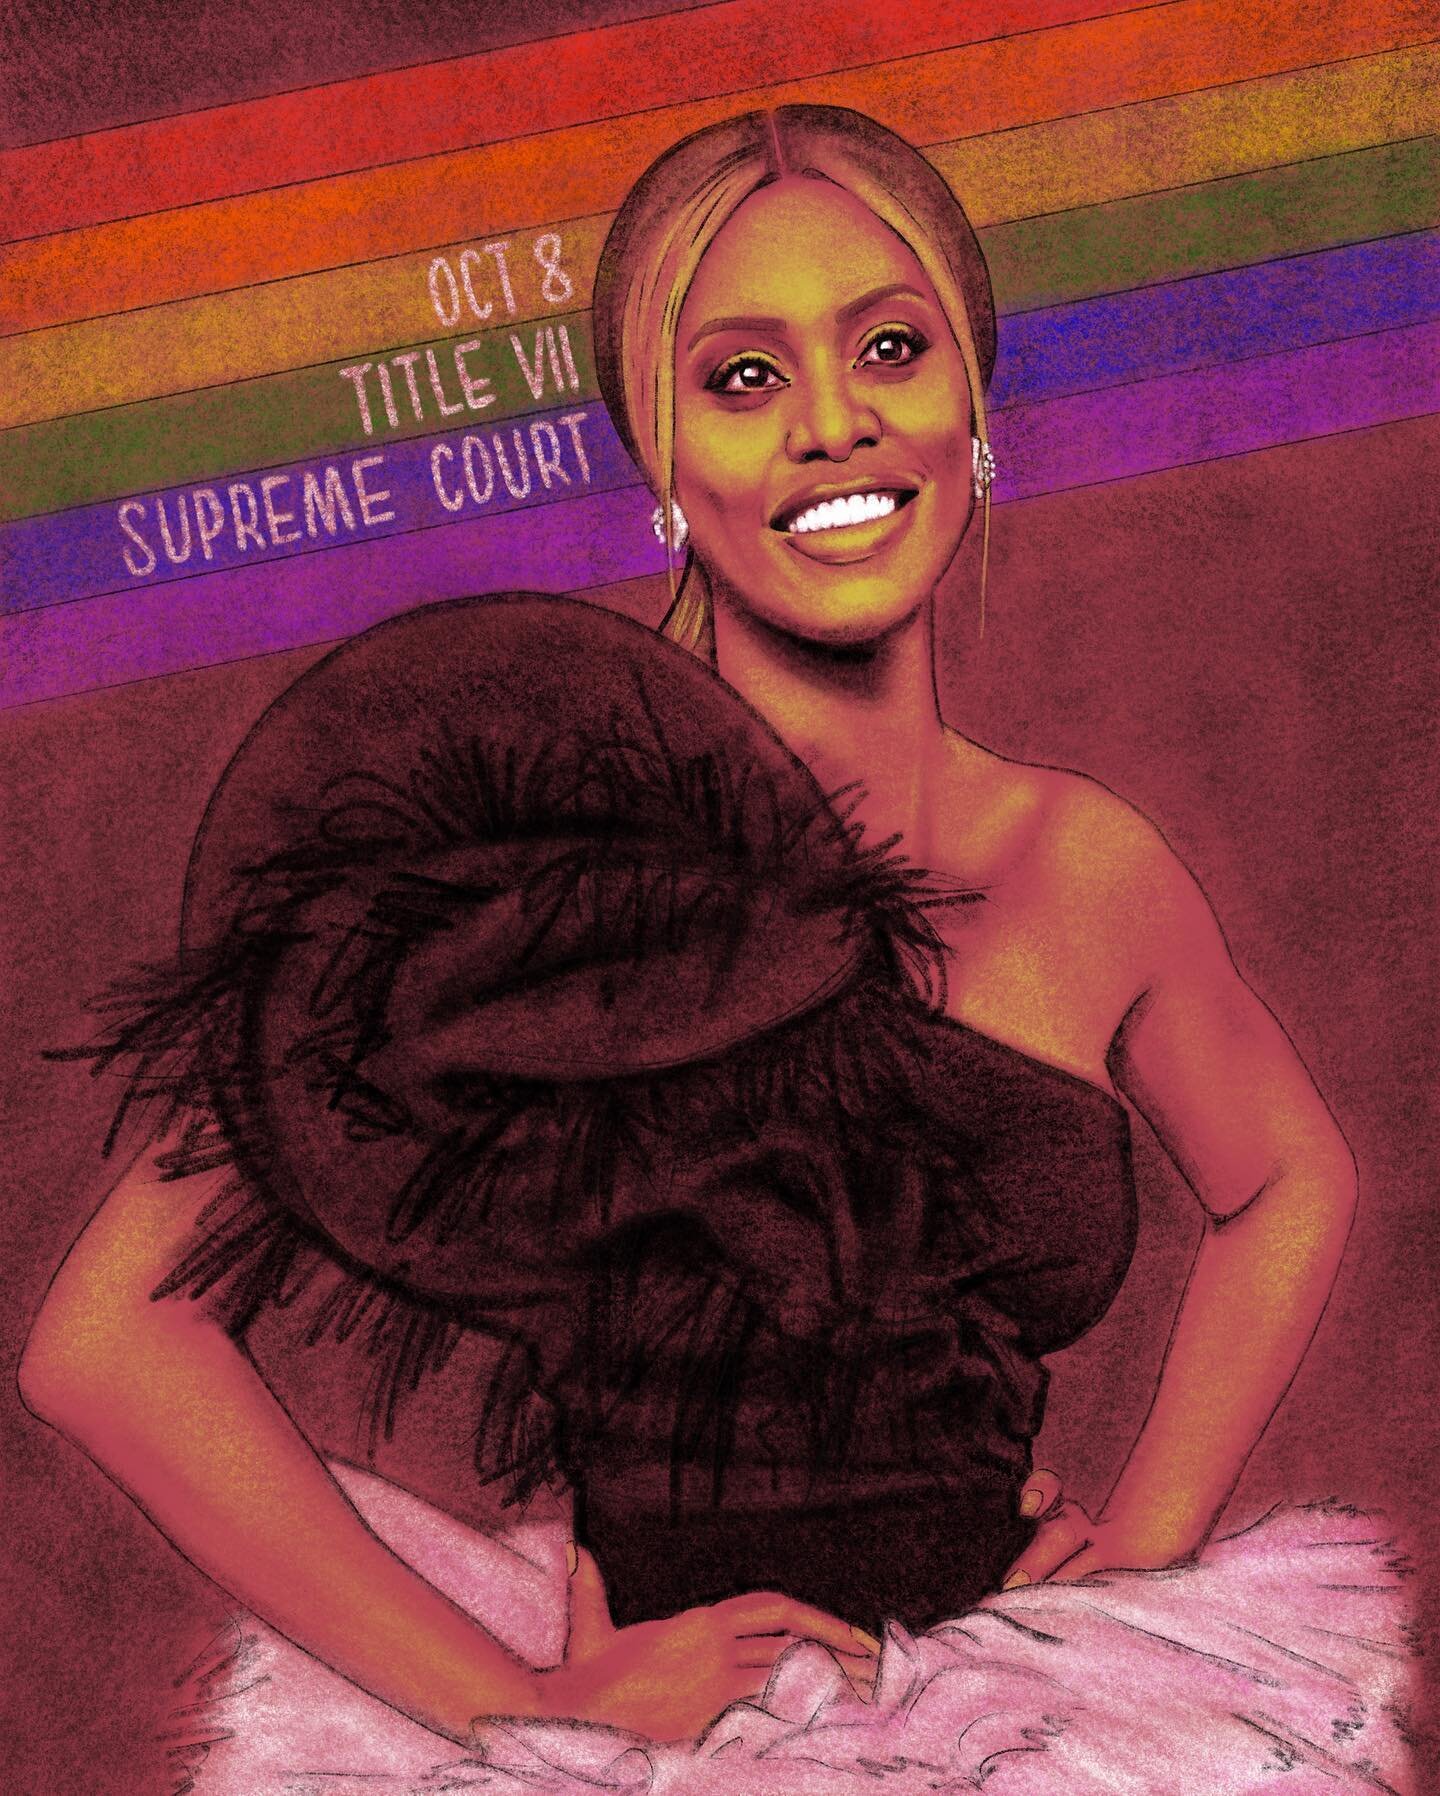 #TransRights are #HumanRights ❤️My drawing of @lavernecox at the 2019 Emmys. The background is inspired by the pride flag Eddie Parker clutch she brought with the message &quot;Oct 8, Title VII, Supreme Court.&quot; Trans rights continue to be in dan